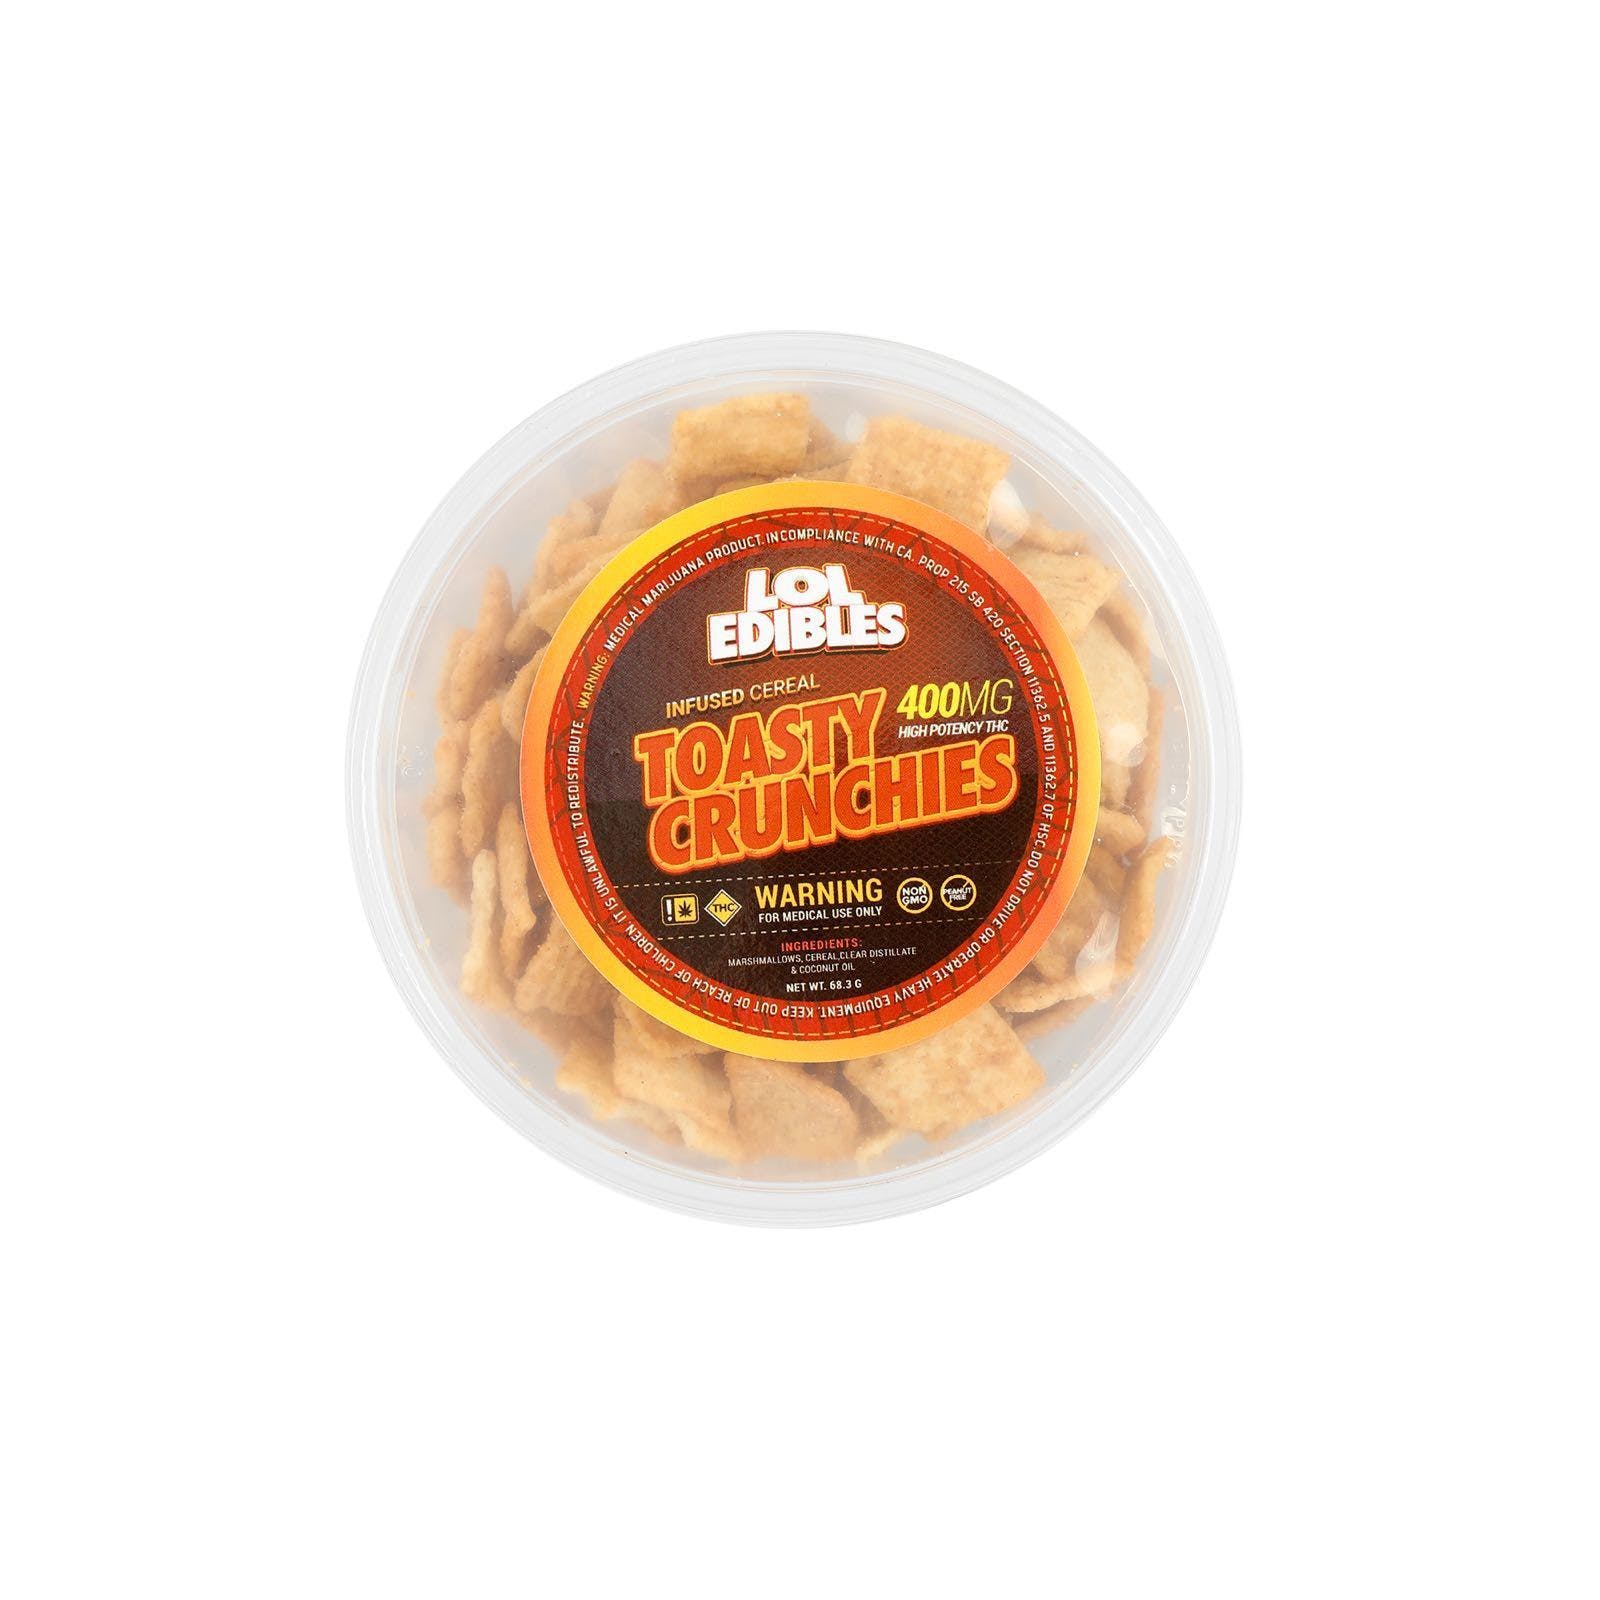 TOASTY CRUNCHIES INFUSED CEREAL - 400MG